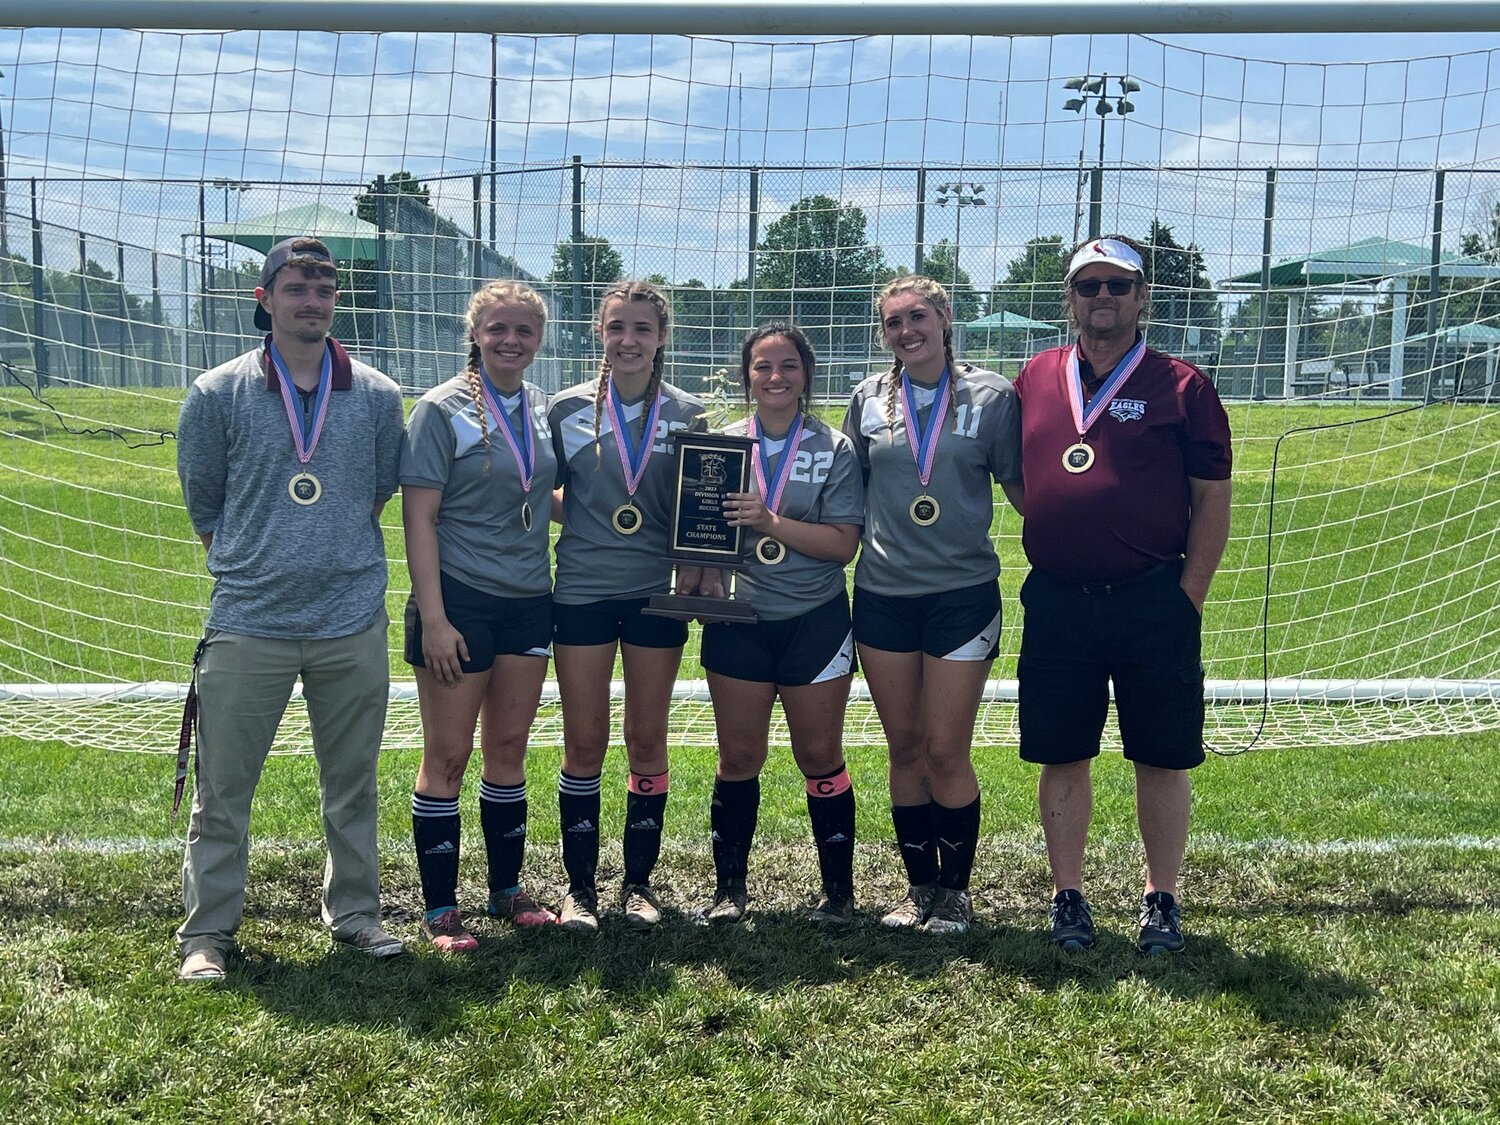 Liberty Christian seniors Alli Meyer (second from left), Anna Meyer (third from left), Joy Kassebaum (third from right) and Kylee Ball (second from right) pose with the championship plaque after winning the MCSAA soccer championship.